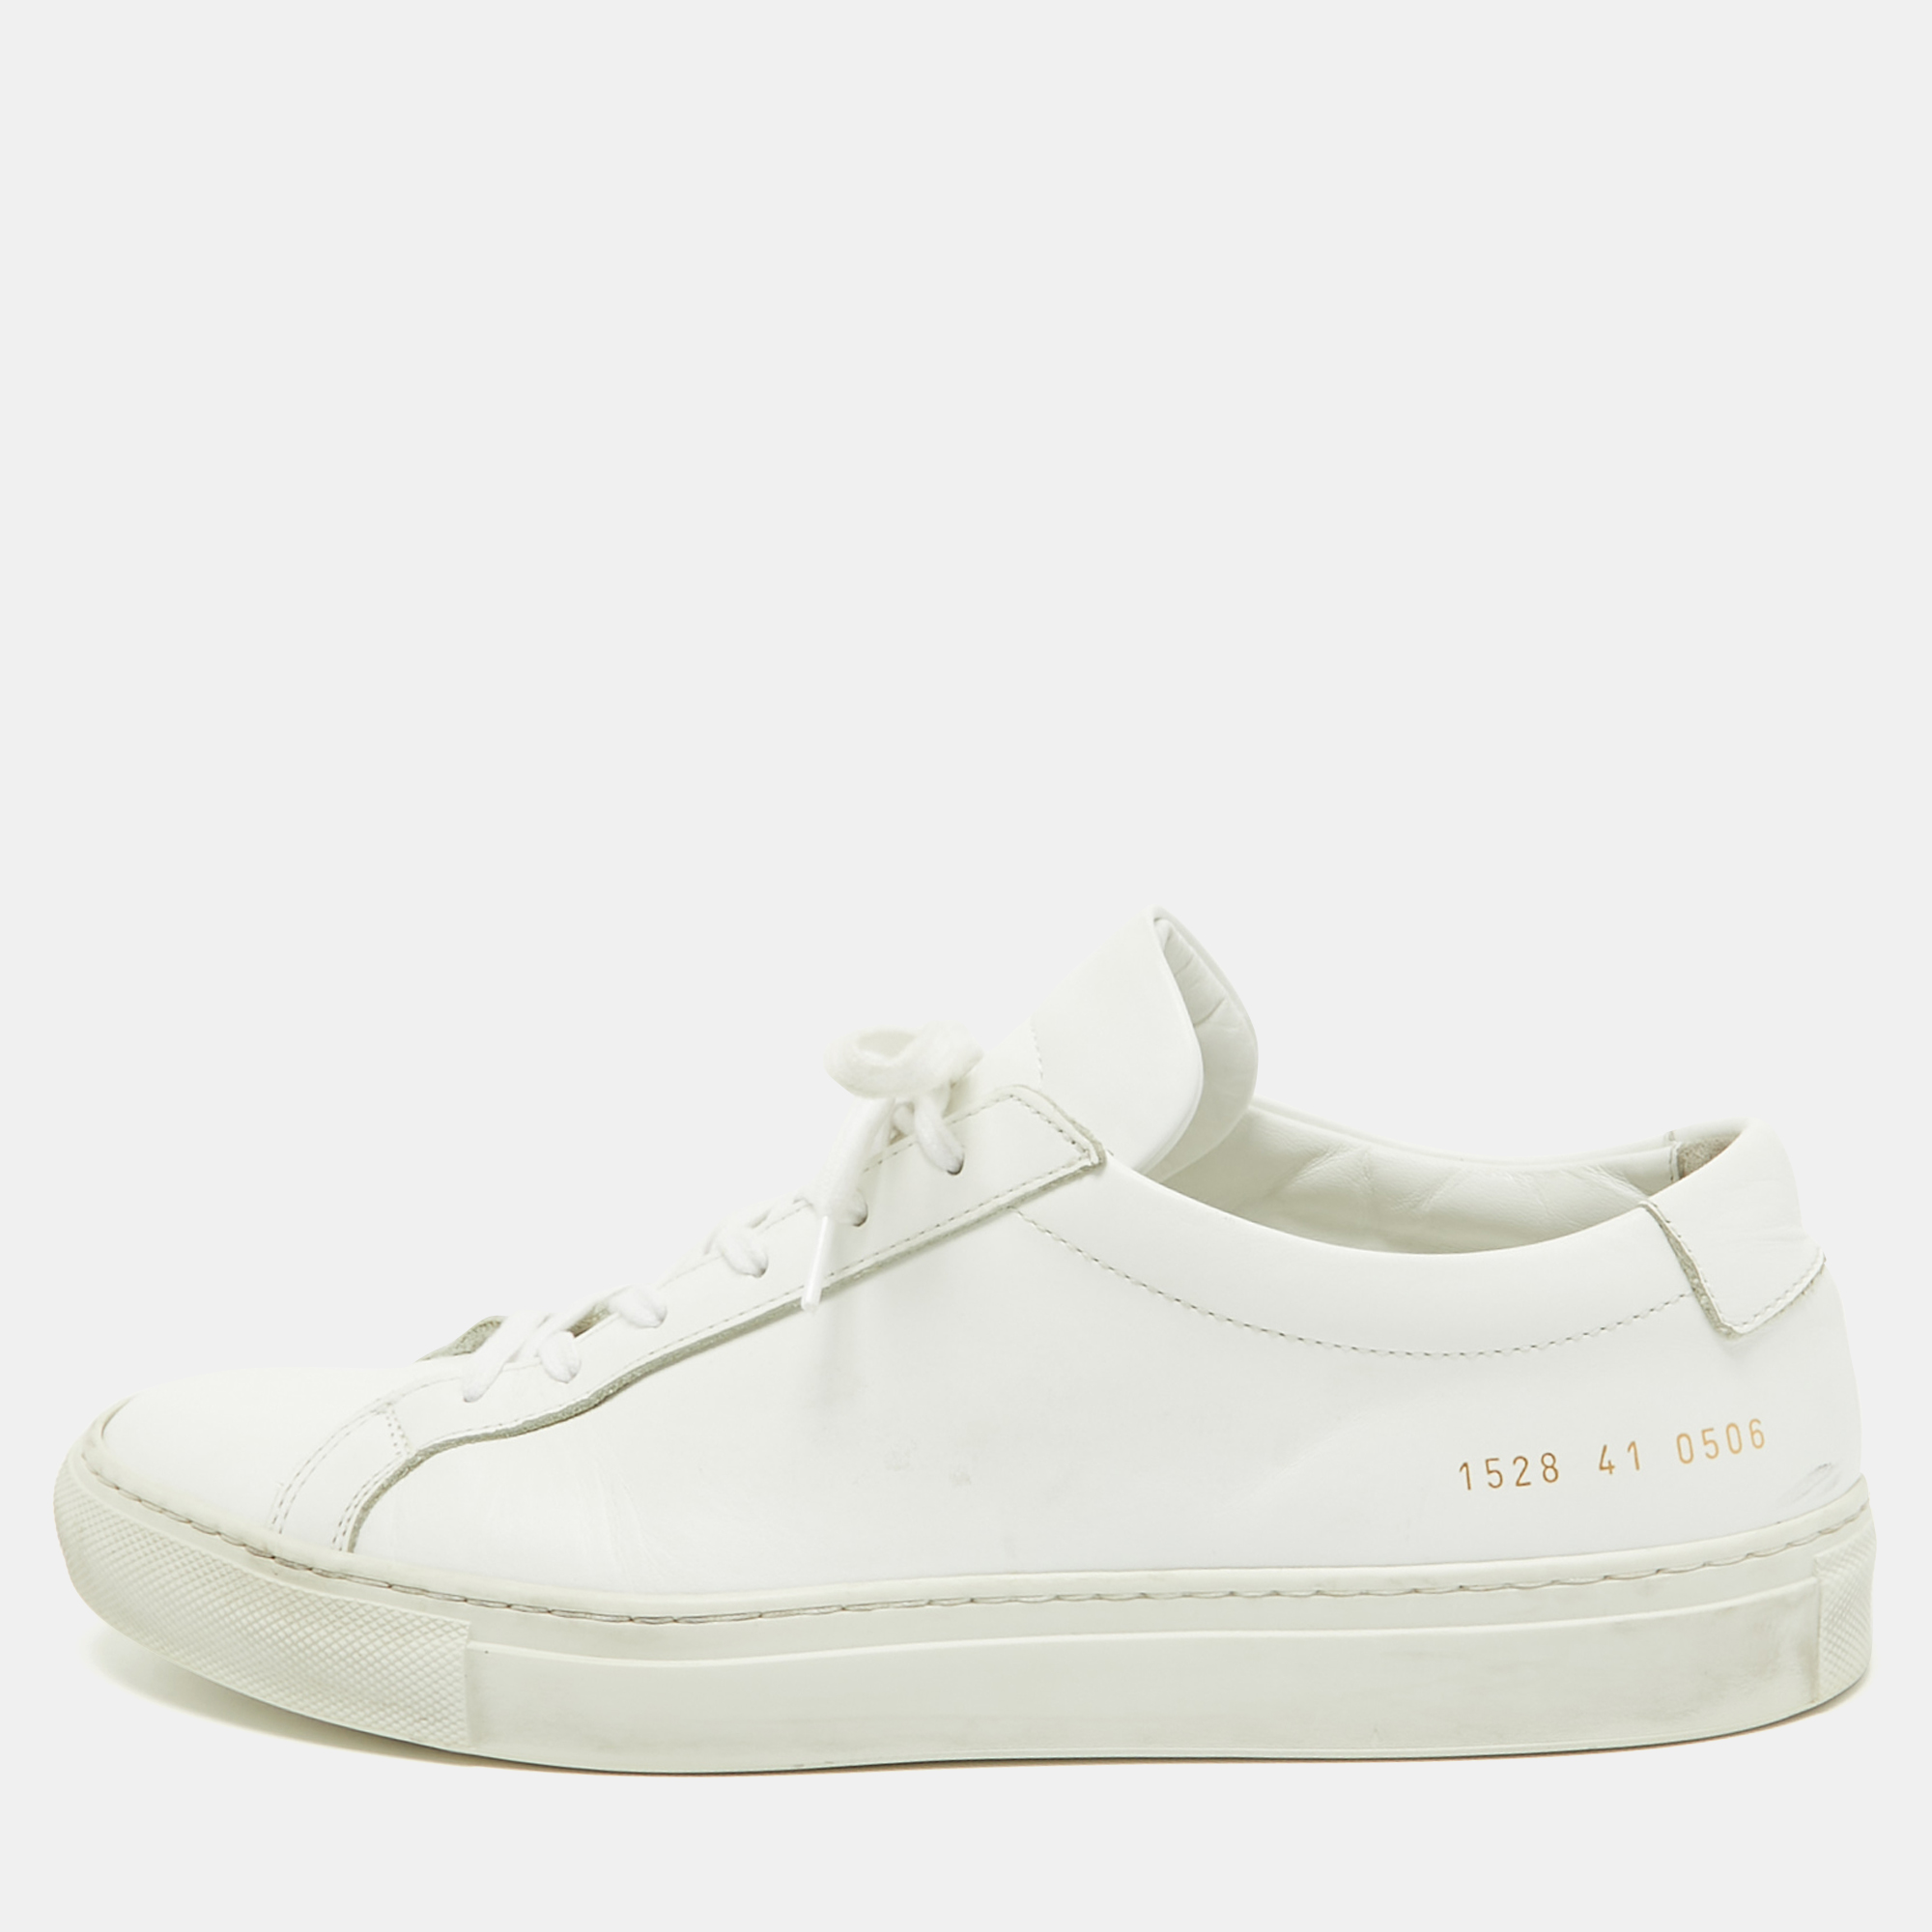 Common Projects White Leather Low Top Sneakers Size 41